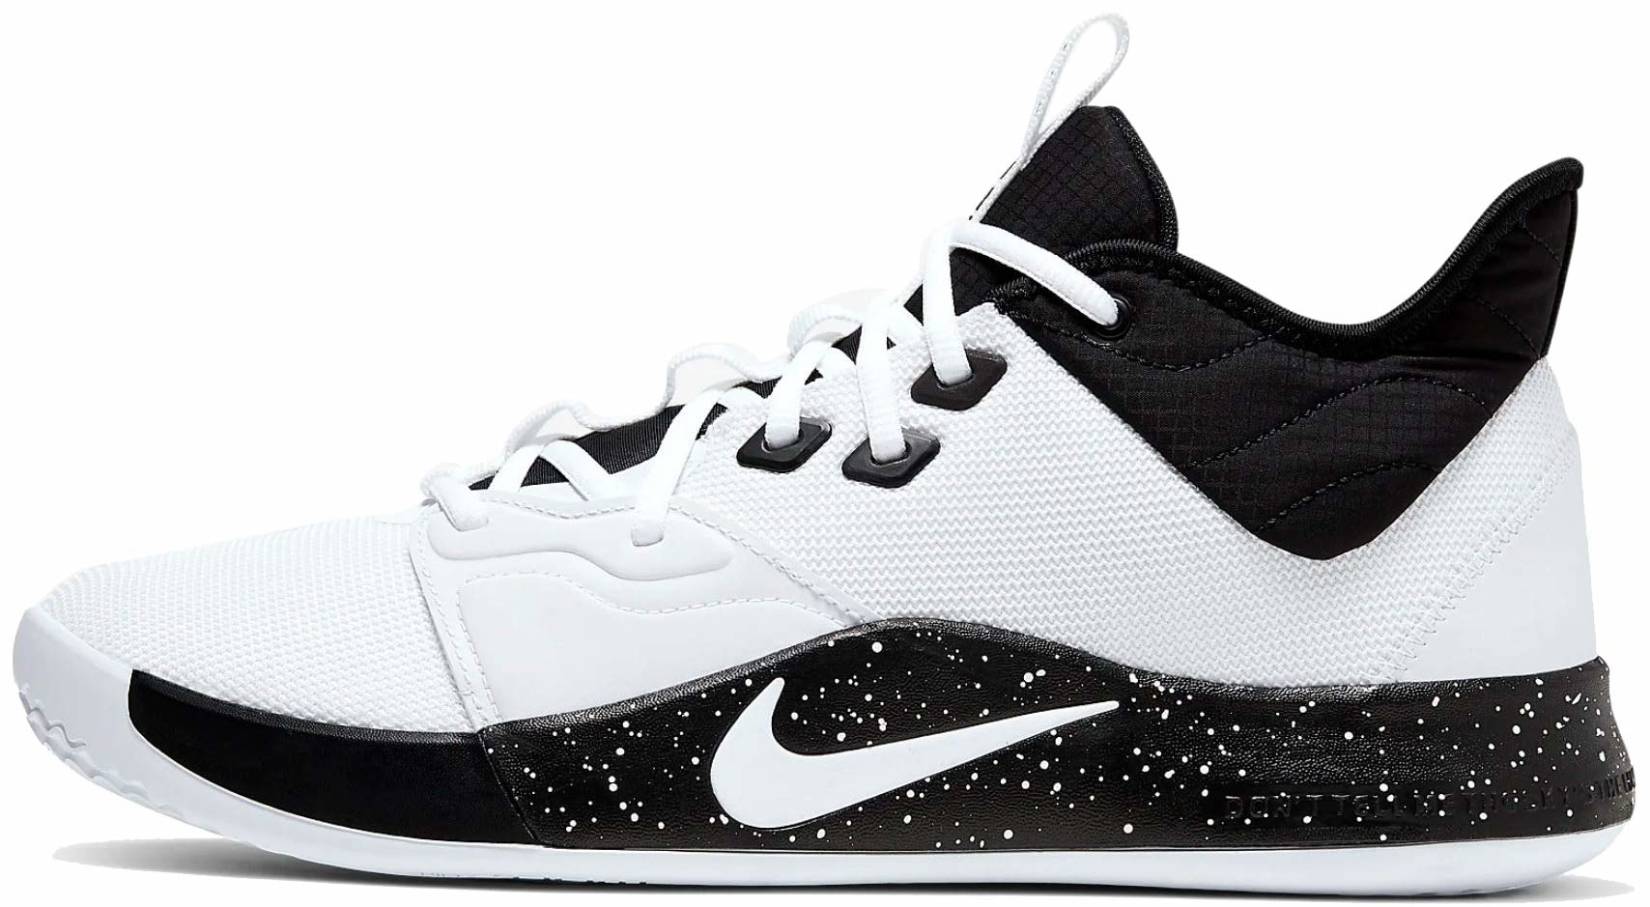 Save 19% on White Basketball Shoes (185 